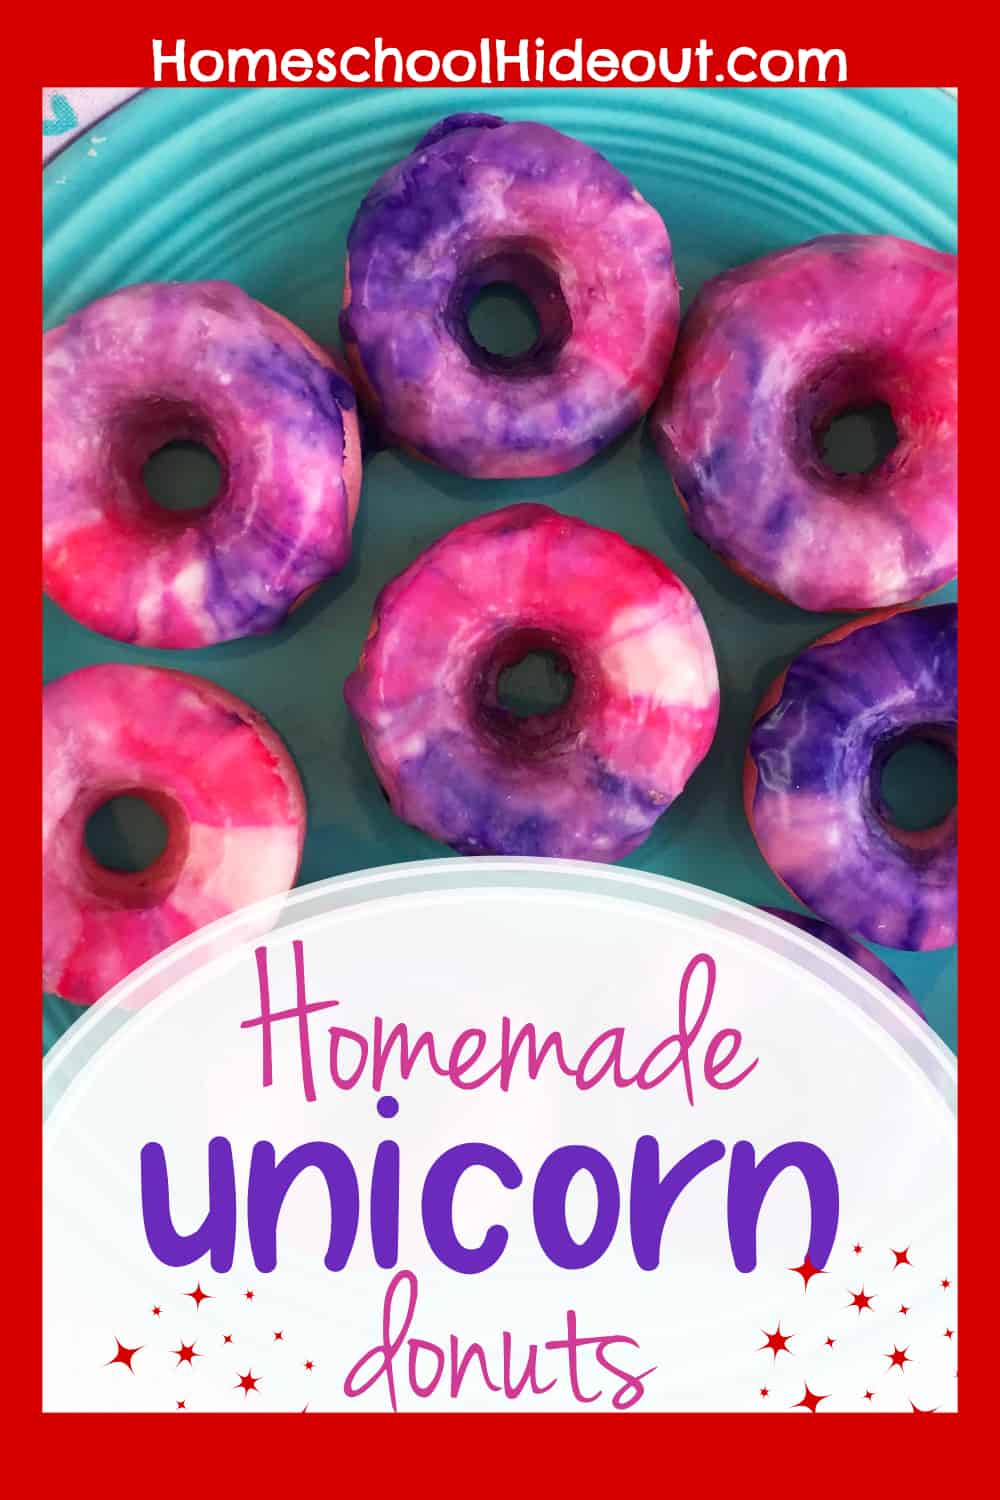 Whip up a batch of homemade unicorn donuts that the whole family will love!